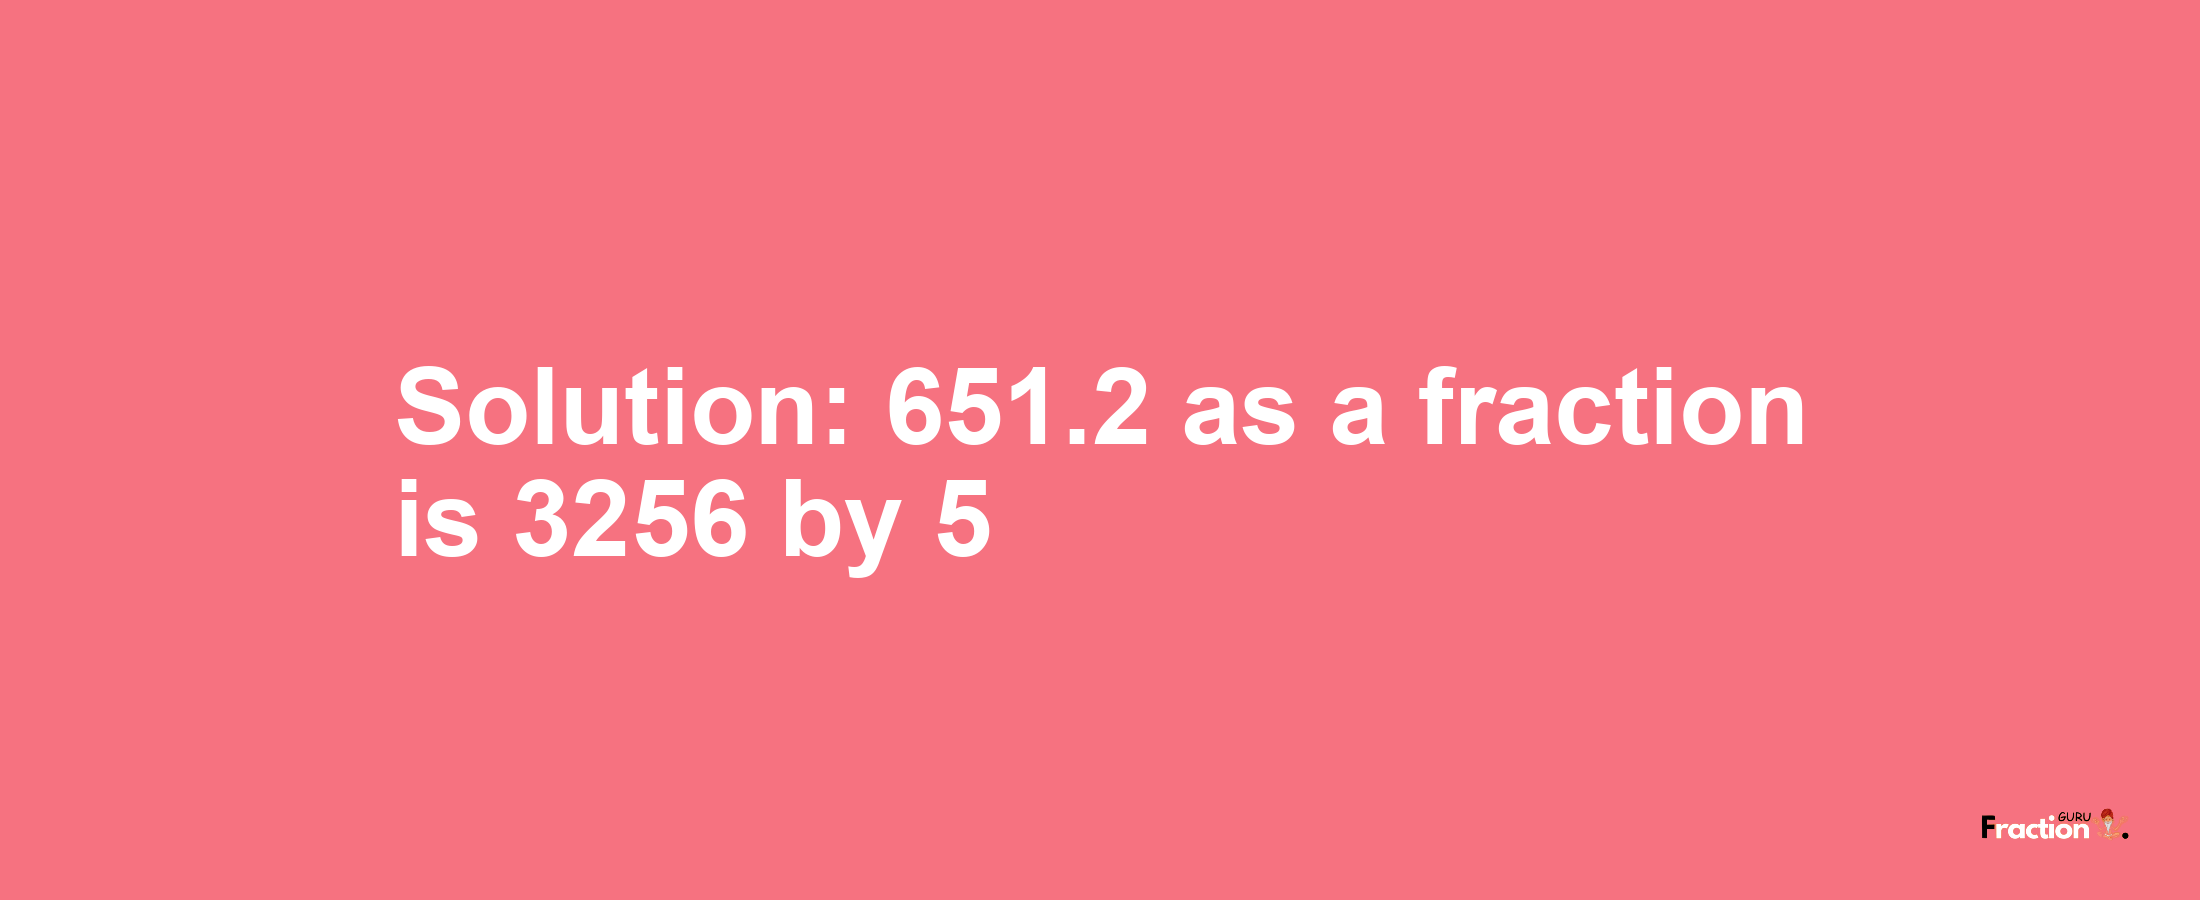 Solution:651.2 as a fraction is 3256/5